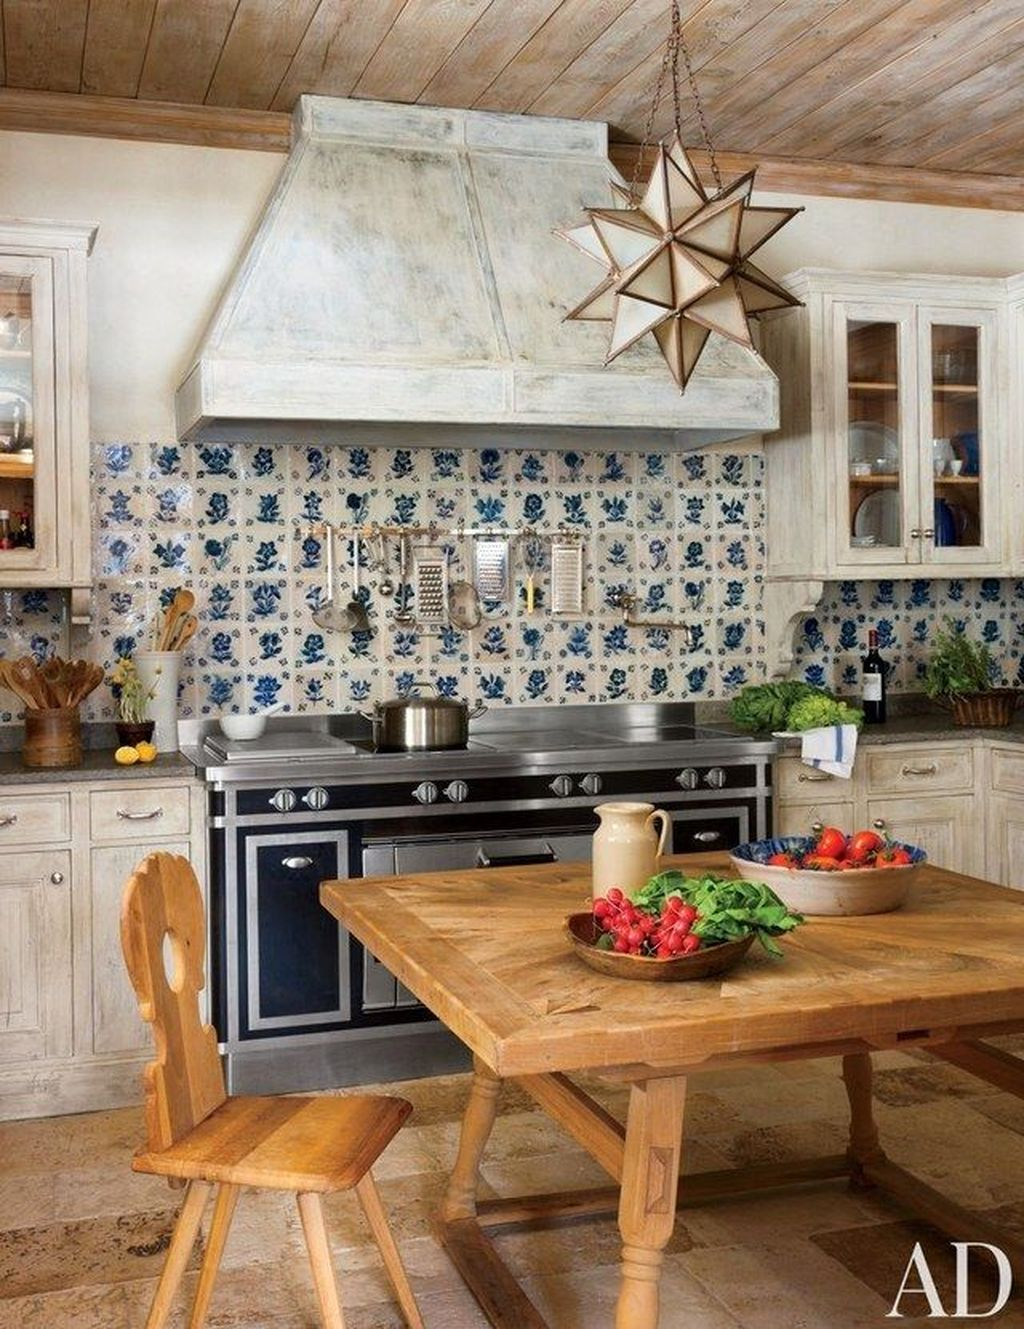 42 Lovely Rustic Western Style Kitchen Decorations Ideas - HOMISHOME